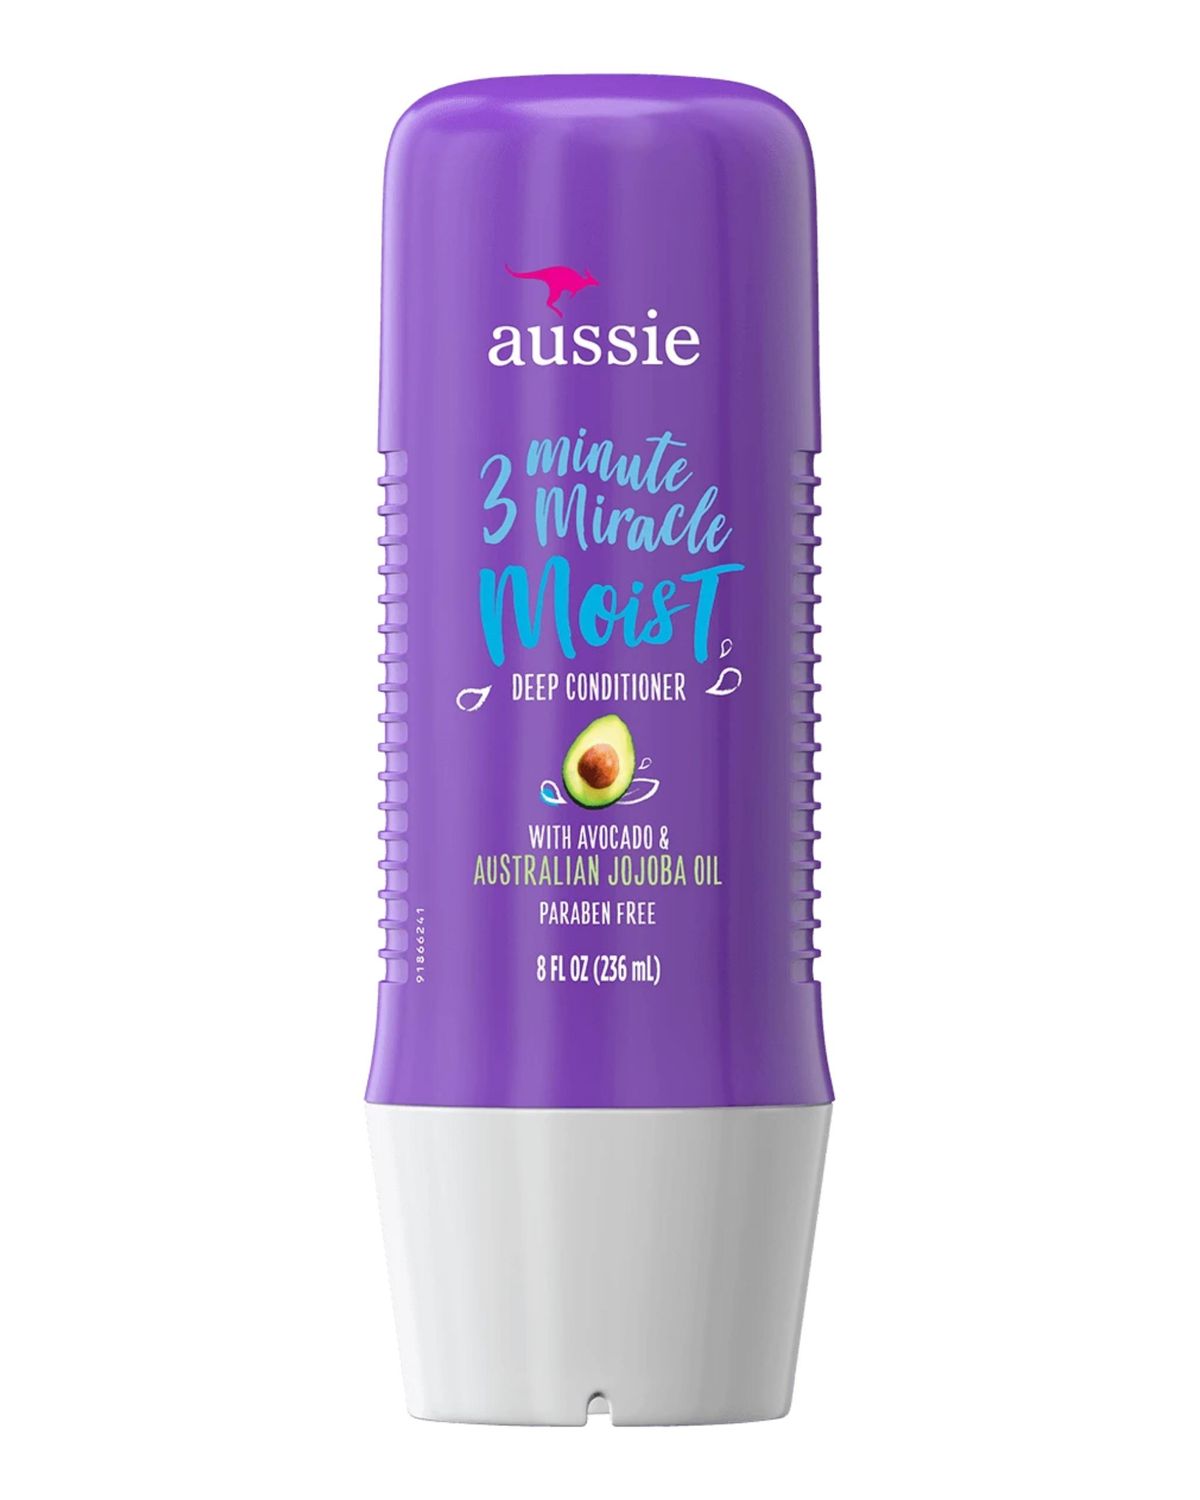 3 Minute Miracle Moist Deep Conditioner